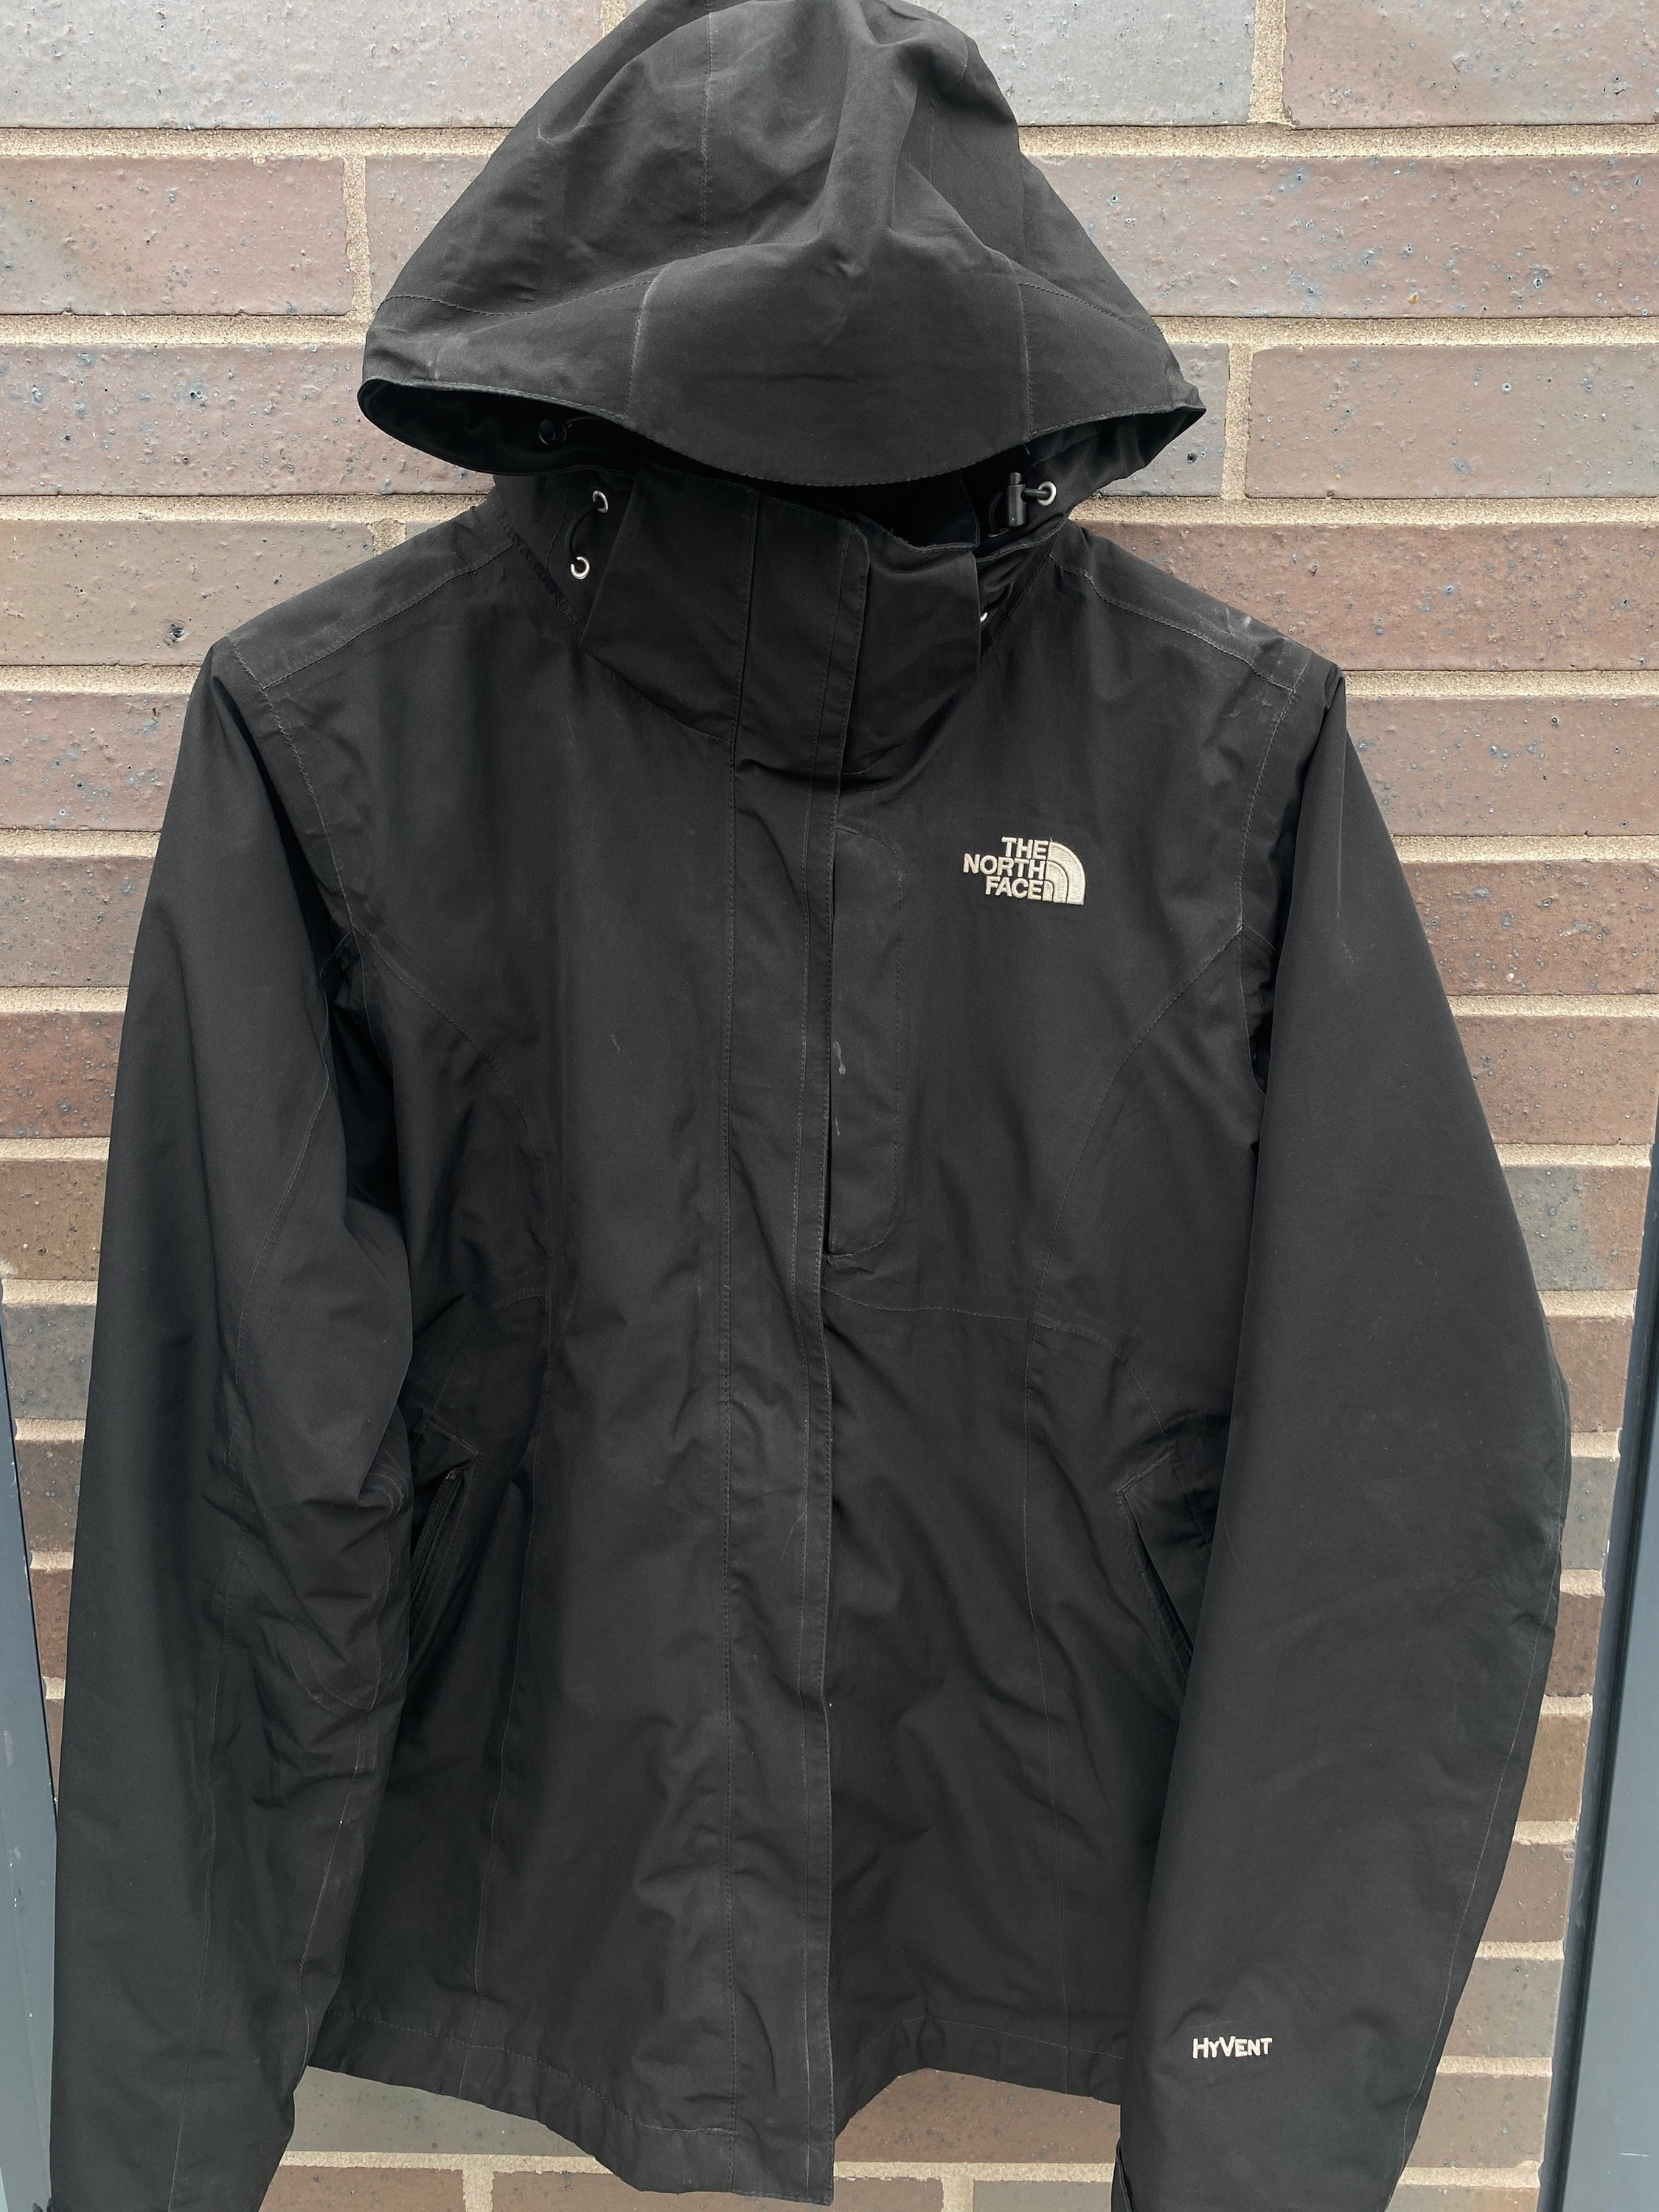 Buy 90s the North Face Hyvent Jacket Winter Coat Online in - Etsy